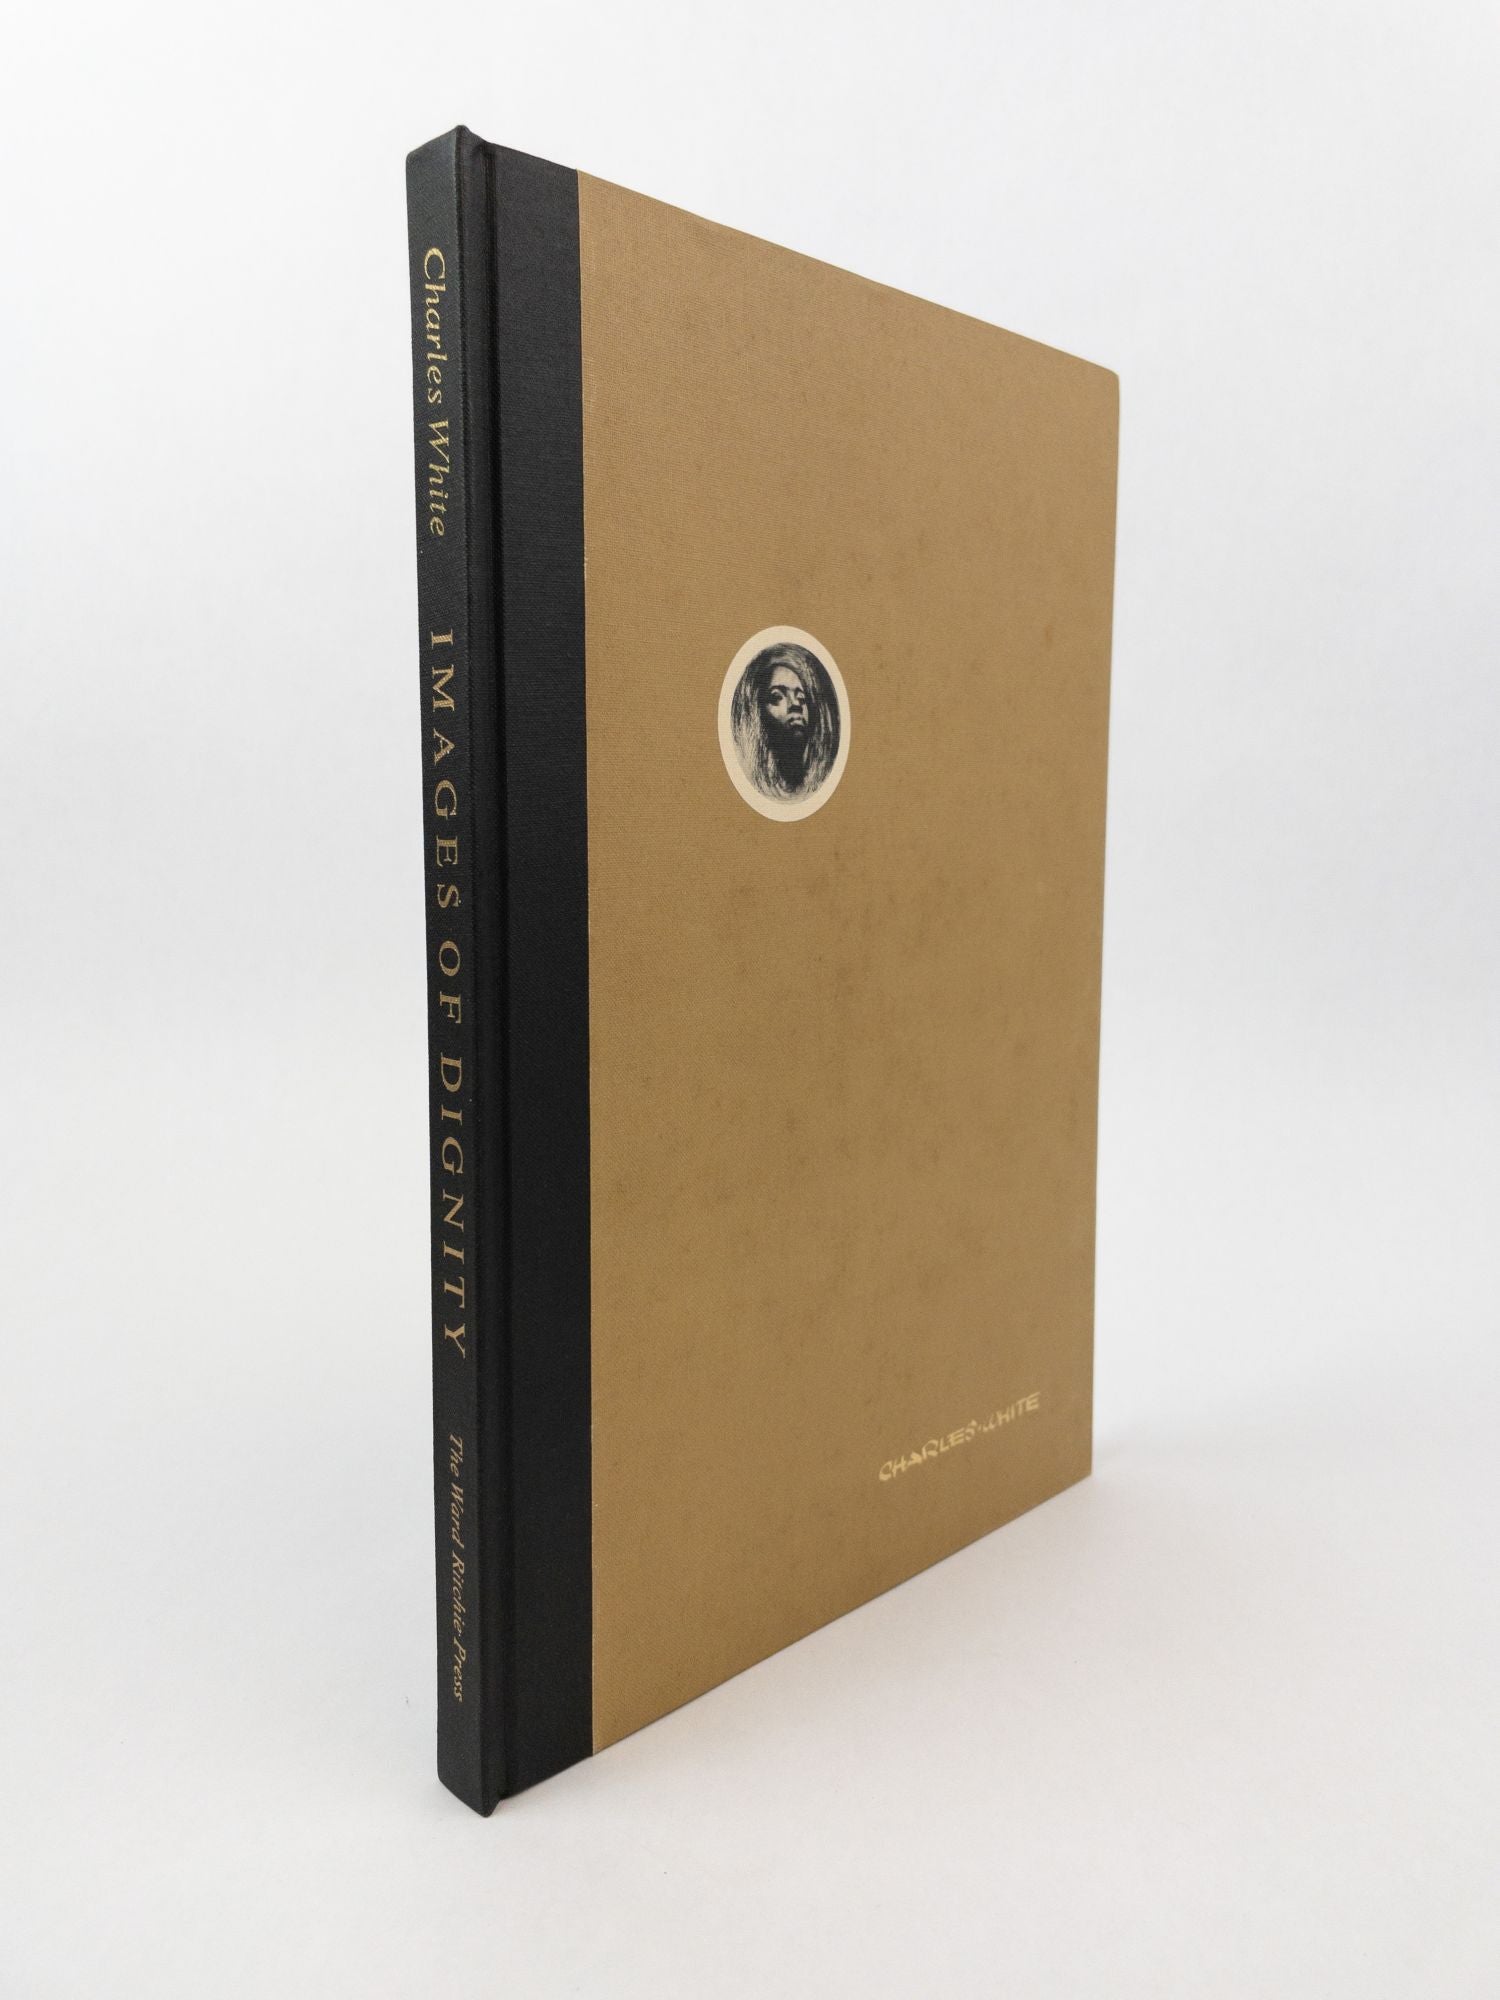 Product Image for IMAGES OF DIGNITY: THE DRAWINGS OF CHARLES WHITE [Signed]